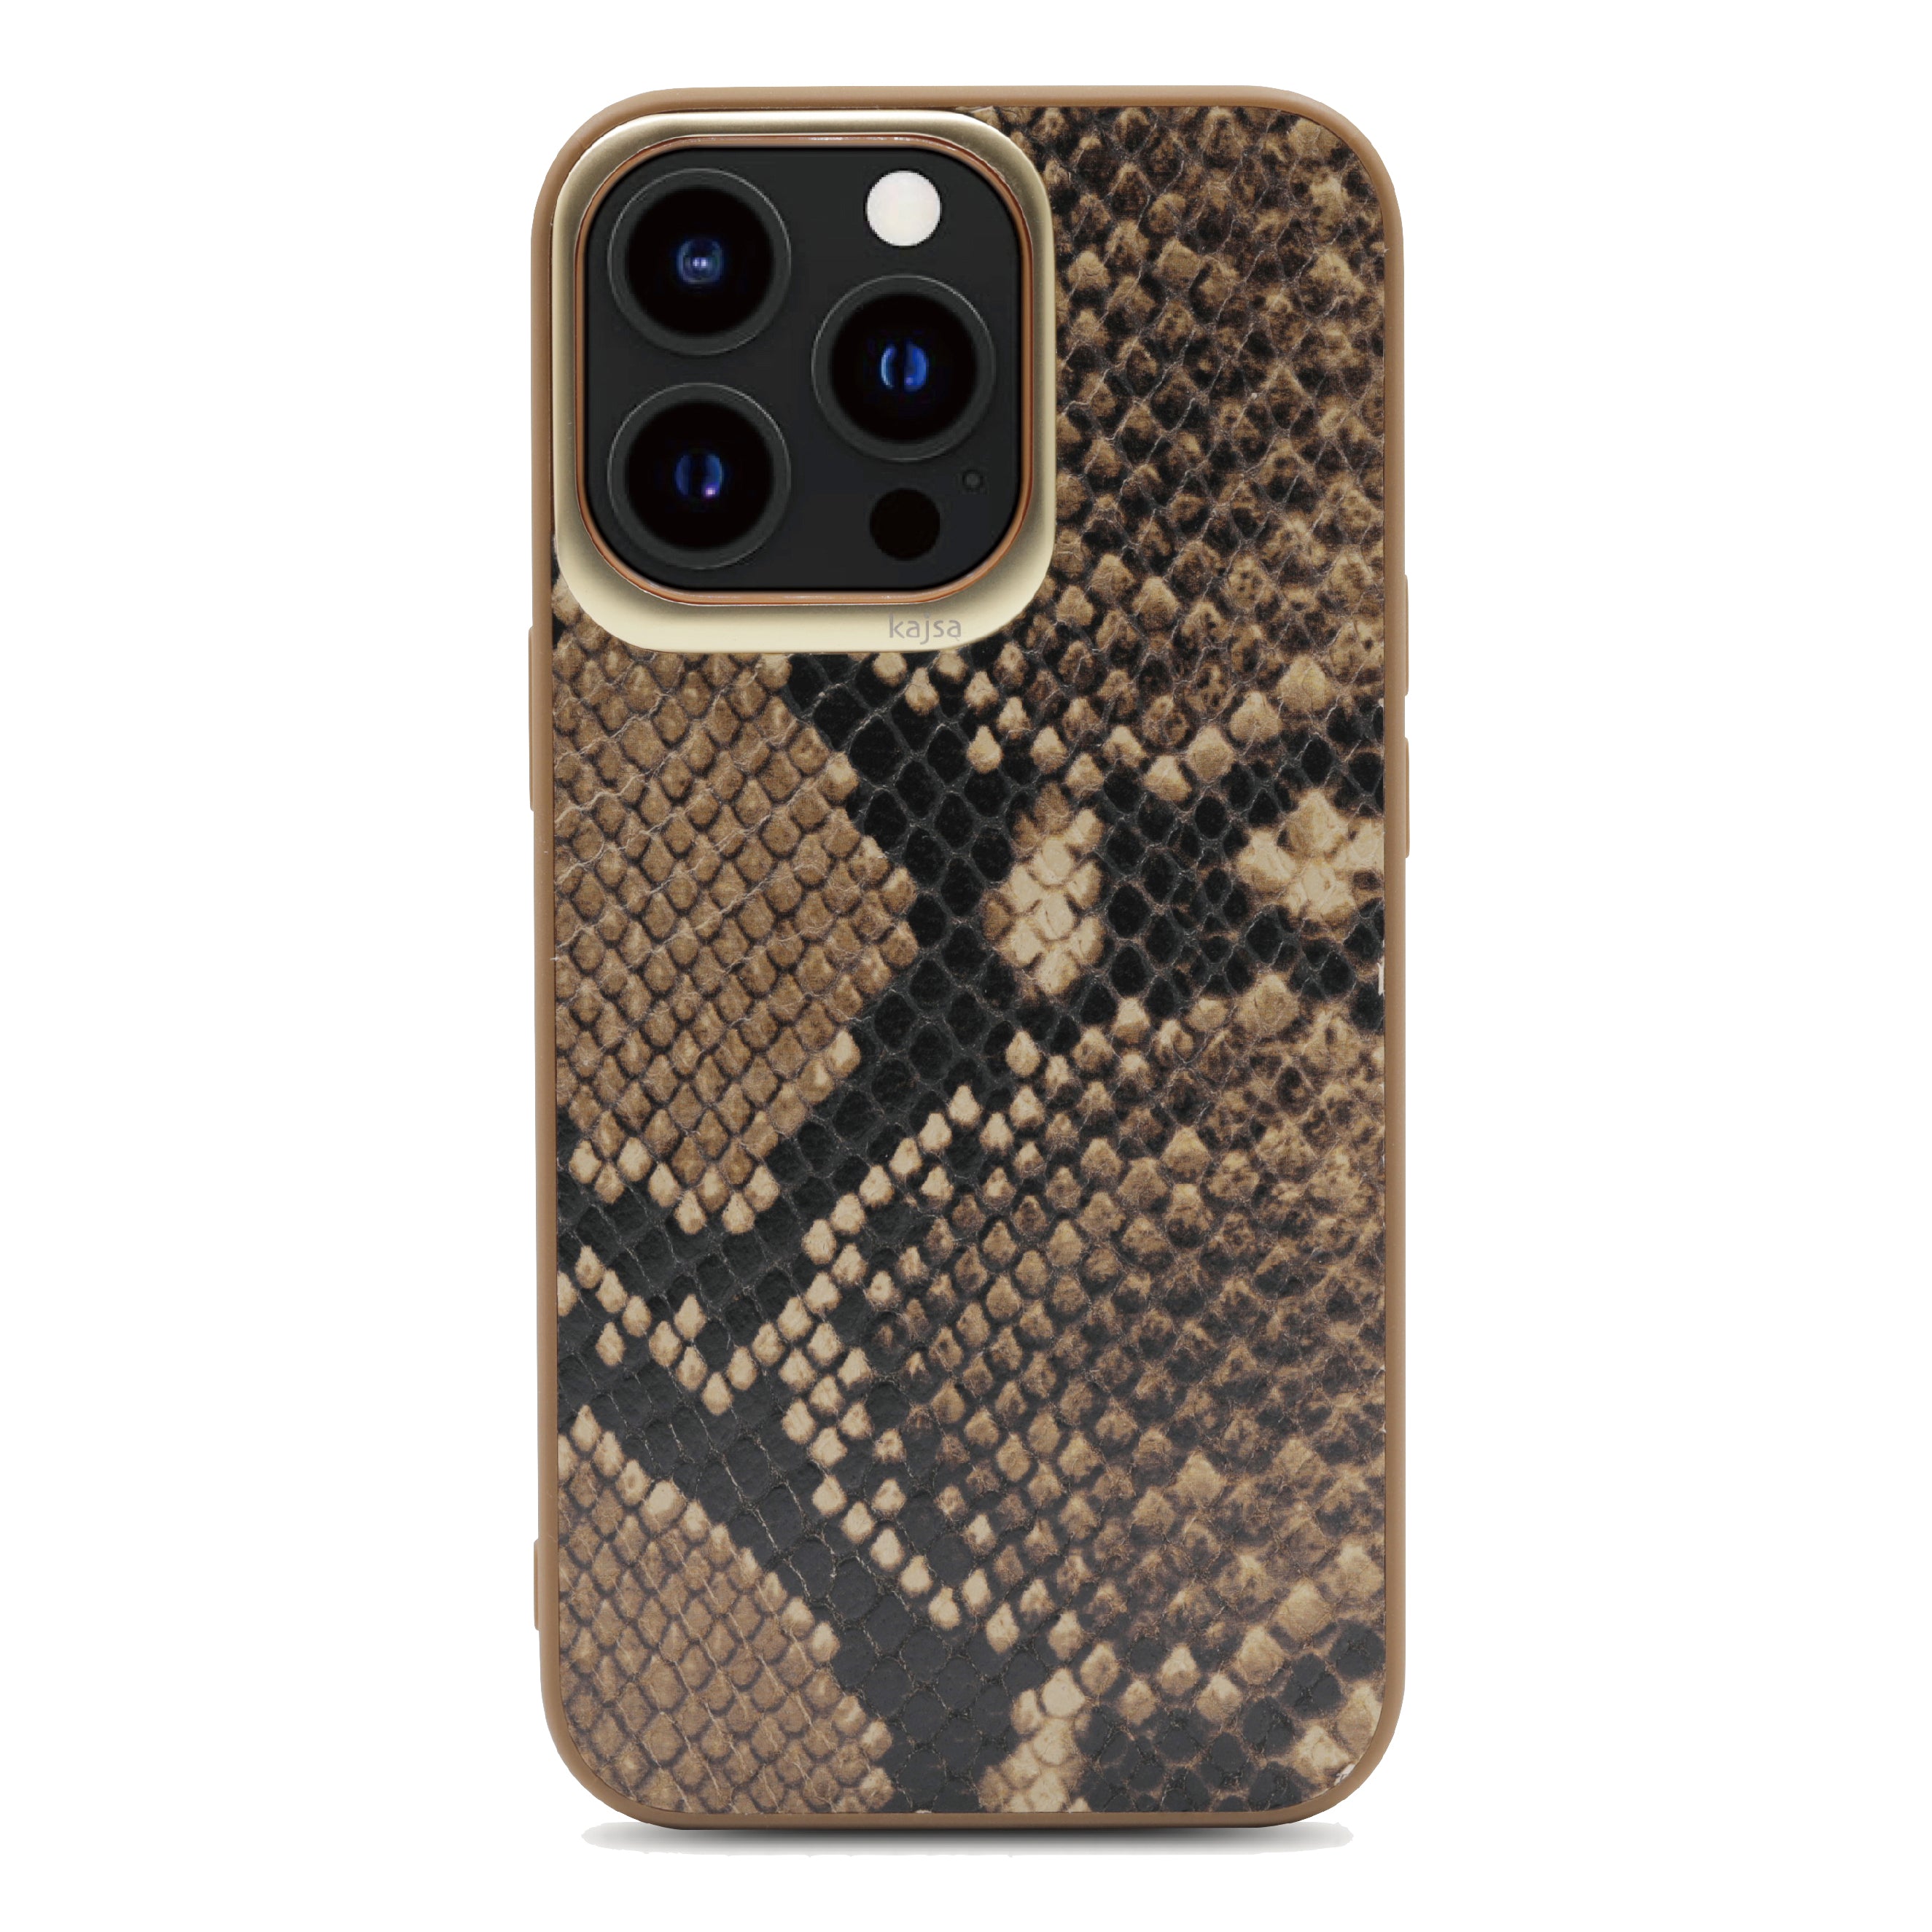 Glamorous Collection - Genuine Leather Snake Pattern Back Case for iPhone 13-Phone Case- phone case - phone cases- phone cover- iphone cover- iphone case- iphone cases- leather case- leather cases- DIYCASE - custom case - leather cover - hand strap case - croco pattern case - snake pattern case - carbon fiber phone case - phone case brand - unique phone case - high quality - phone case brand - protective case - buy phone case hong kong - online buy phone case - iphone‎手機殼 - 客製化手機殼 - samsung ‎手機殼 - 香港手機殼 - 買